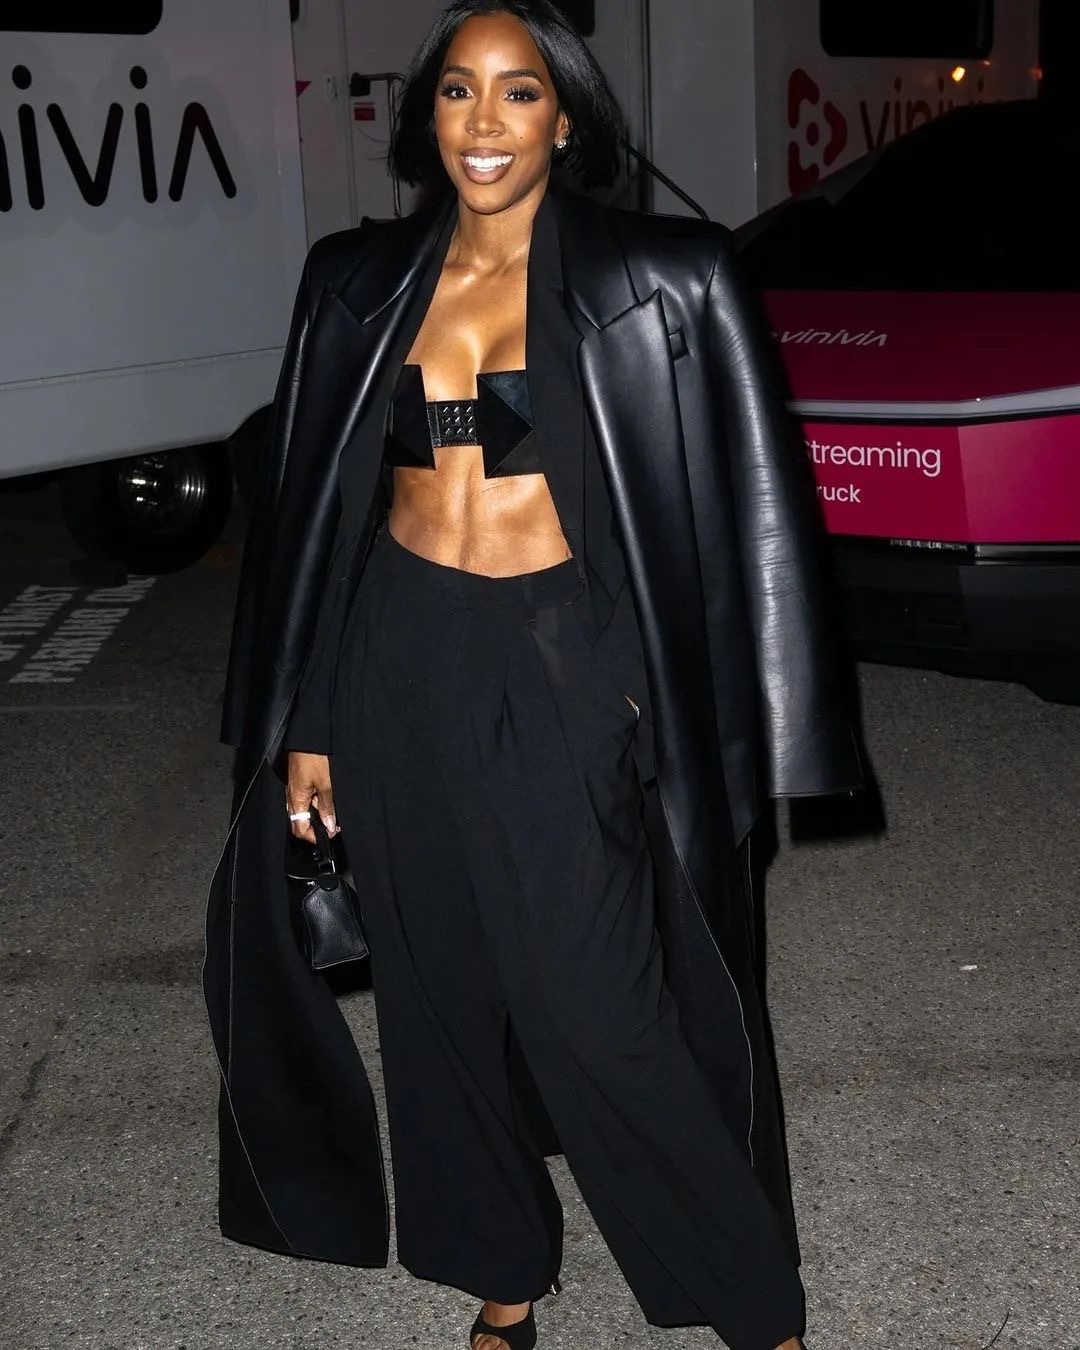 Kelly Rowland Wore a Black Giuseppe Di Morabito Look with a Metal Ashton Michael Bra and Black Ricagno Heels 2